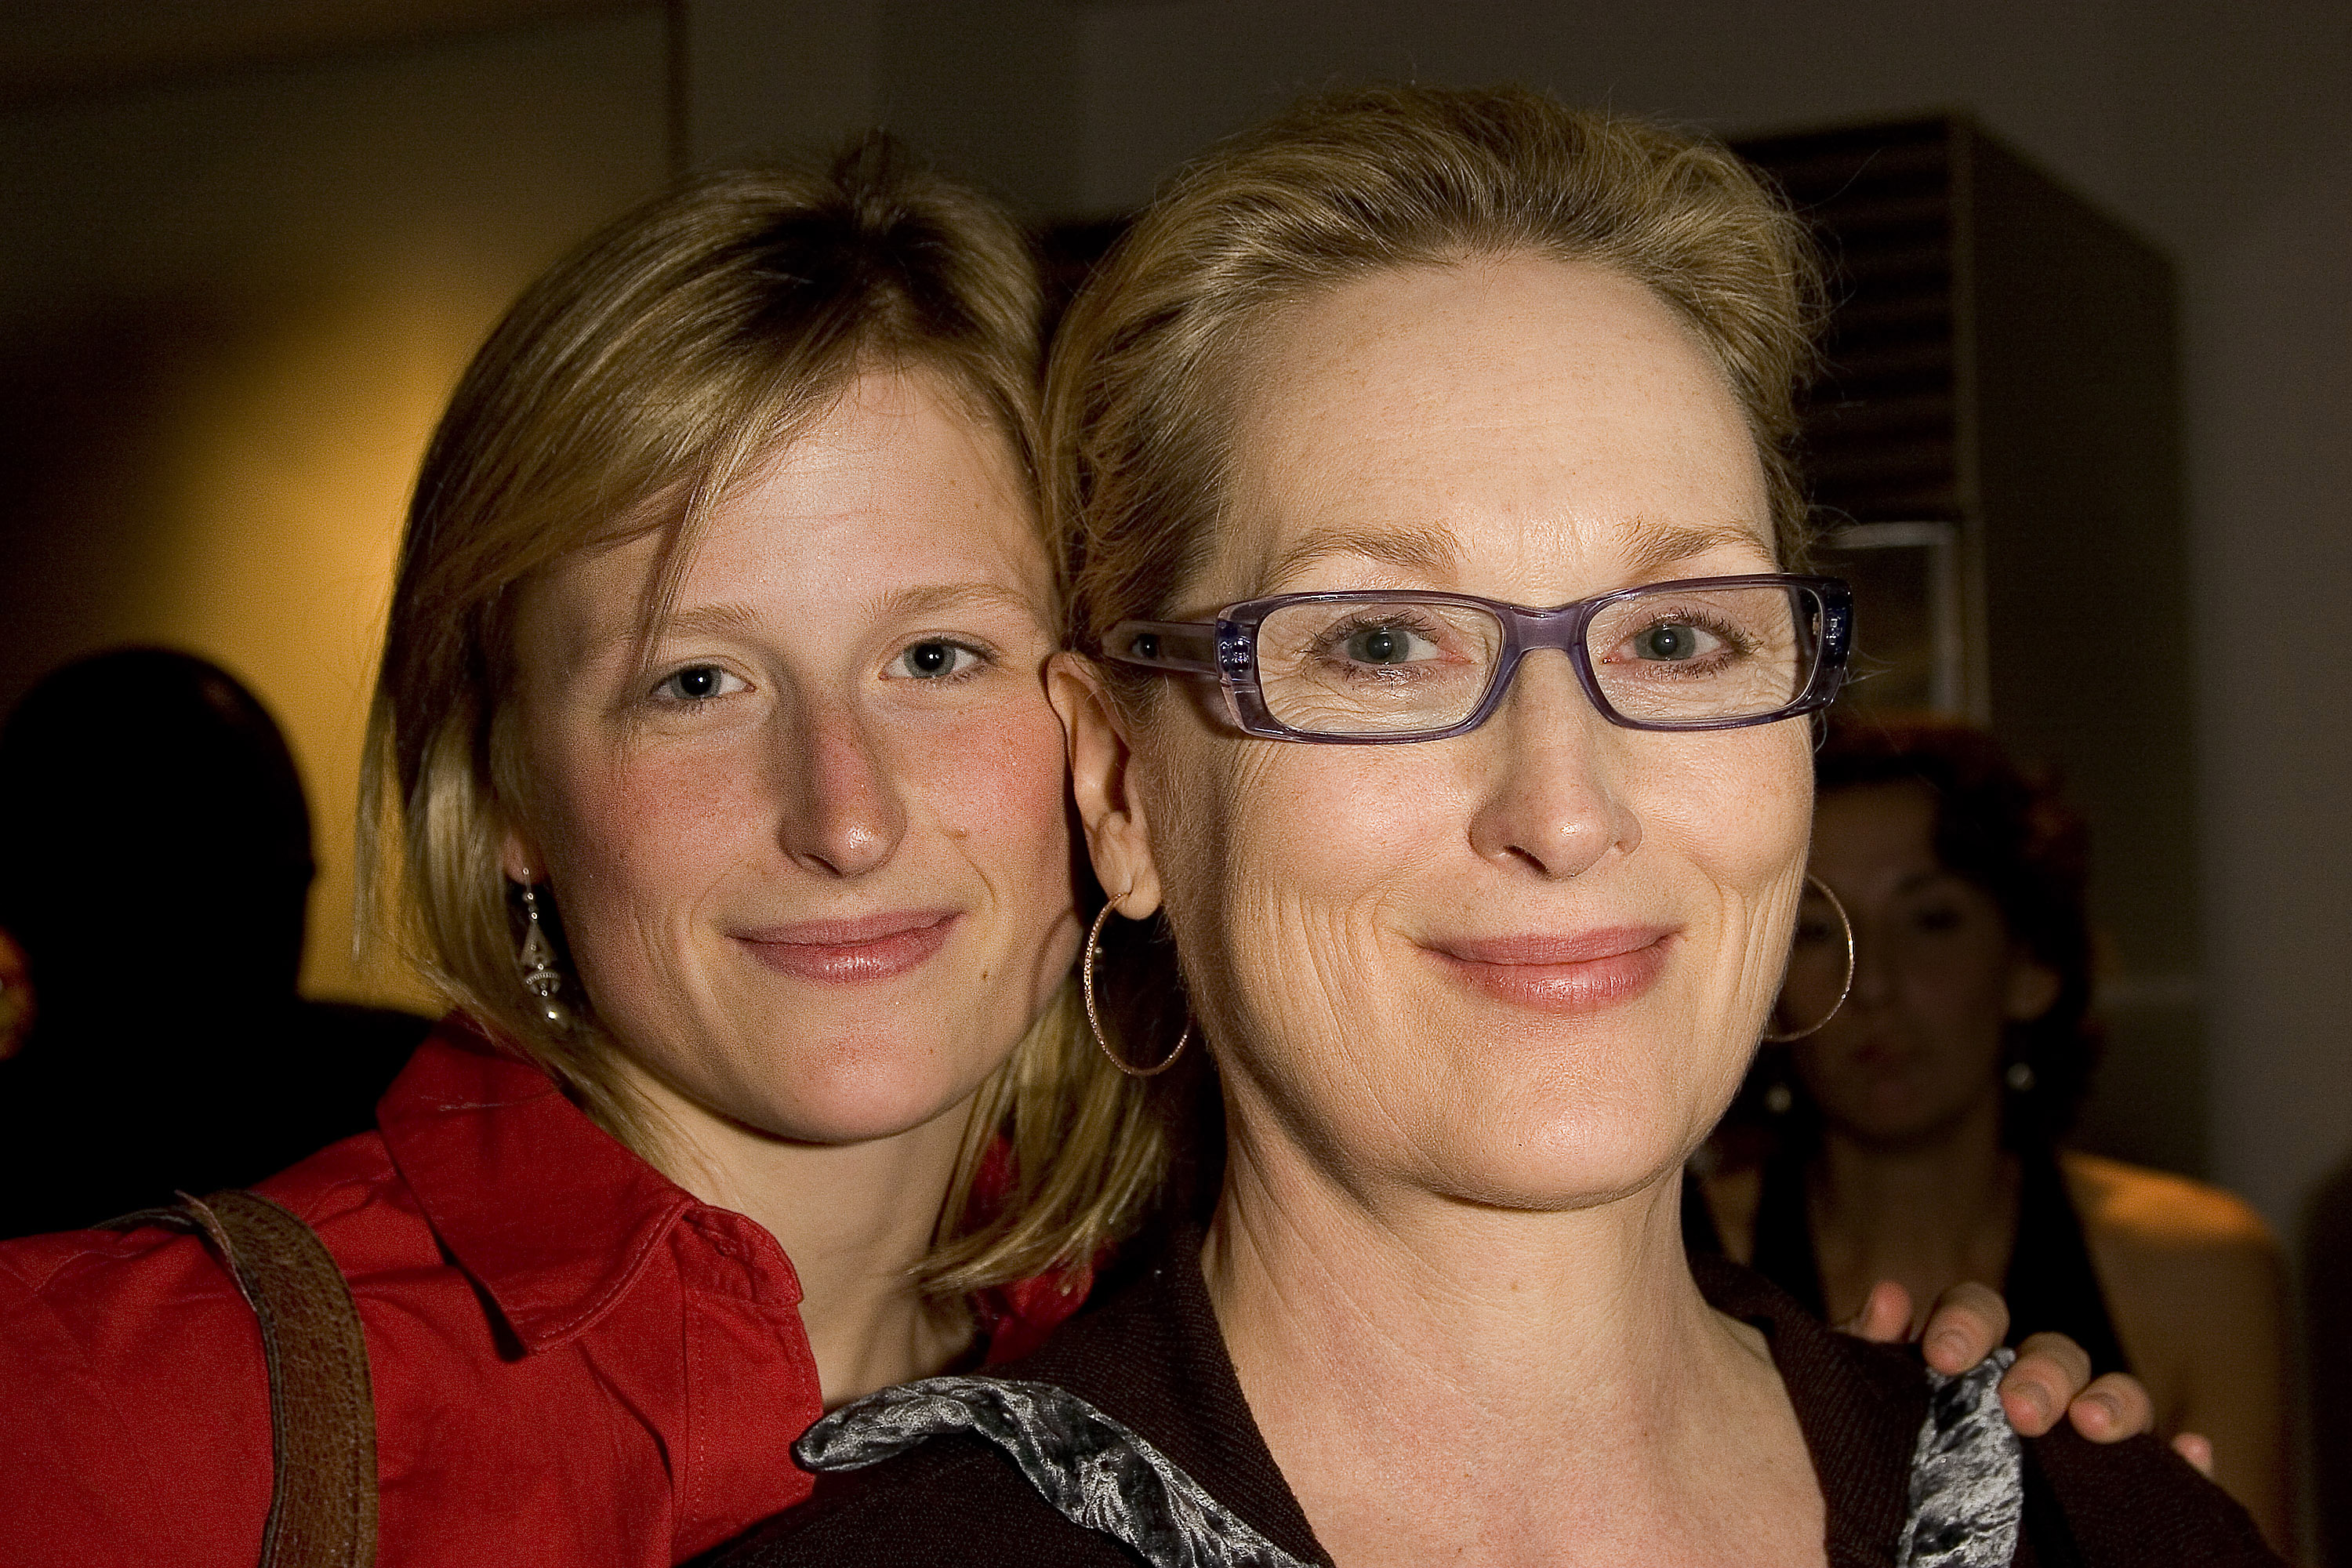 Mamie Gummer y Meryl Streep asisten a On The Road to Equality-An Evening of Jazz and Readings to Benefit Equality Now, el 15 de mayo de 2006. | Fuente: Getty Images